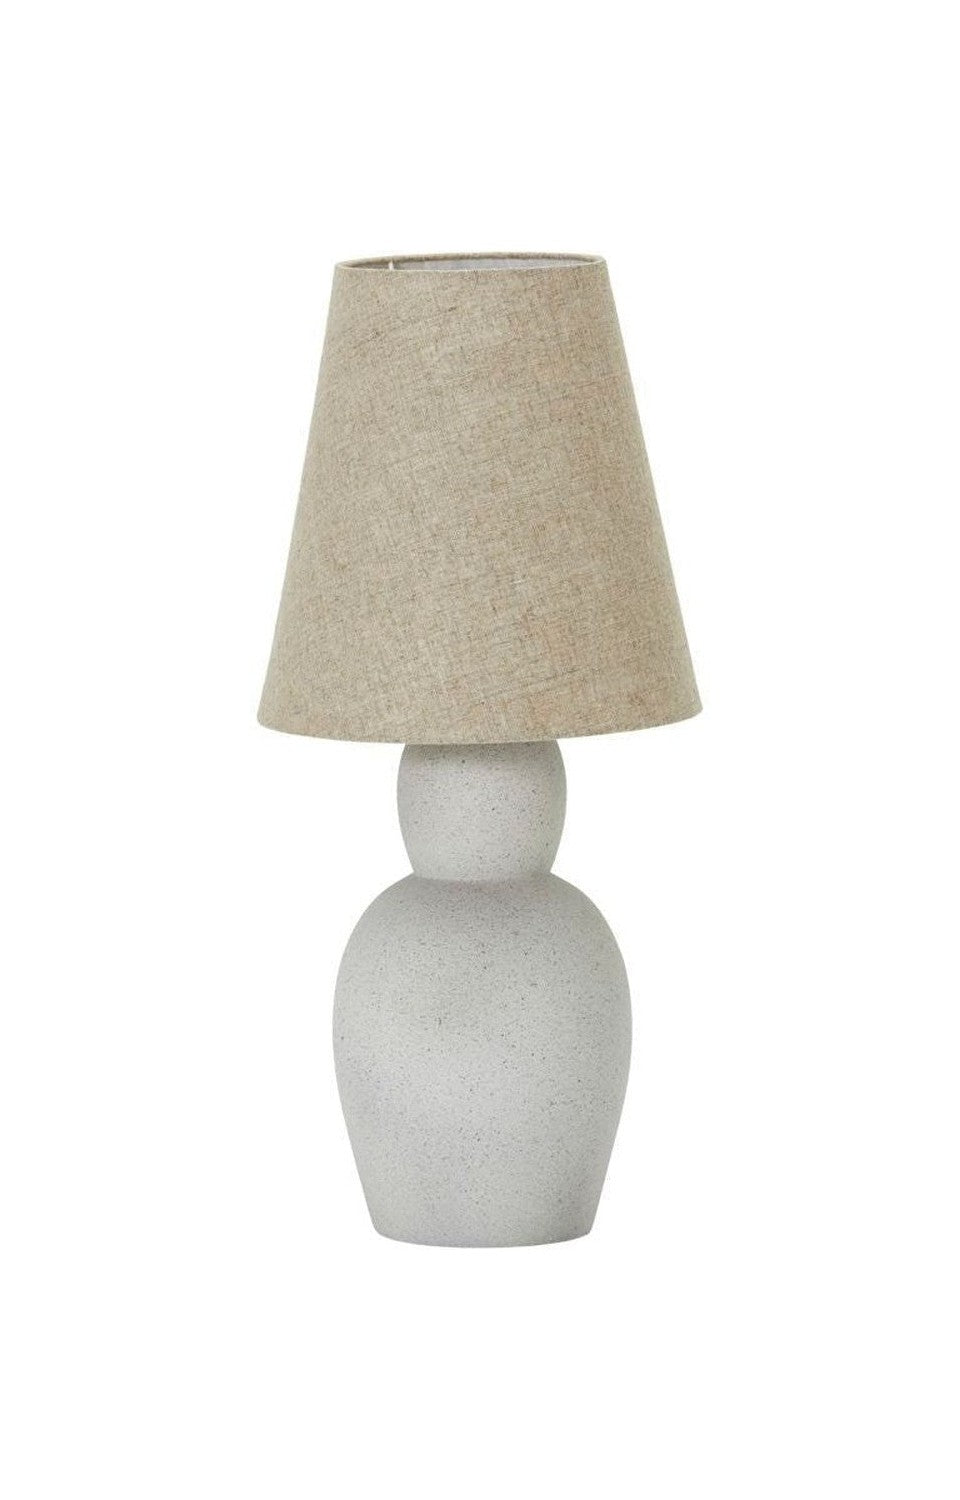 House Doctor Table lamp incl. lampshade, HDOrga, Sand